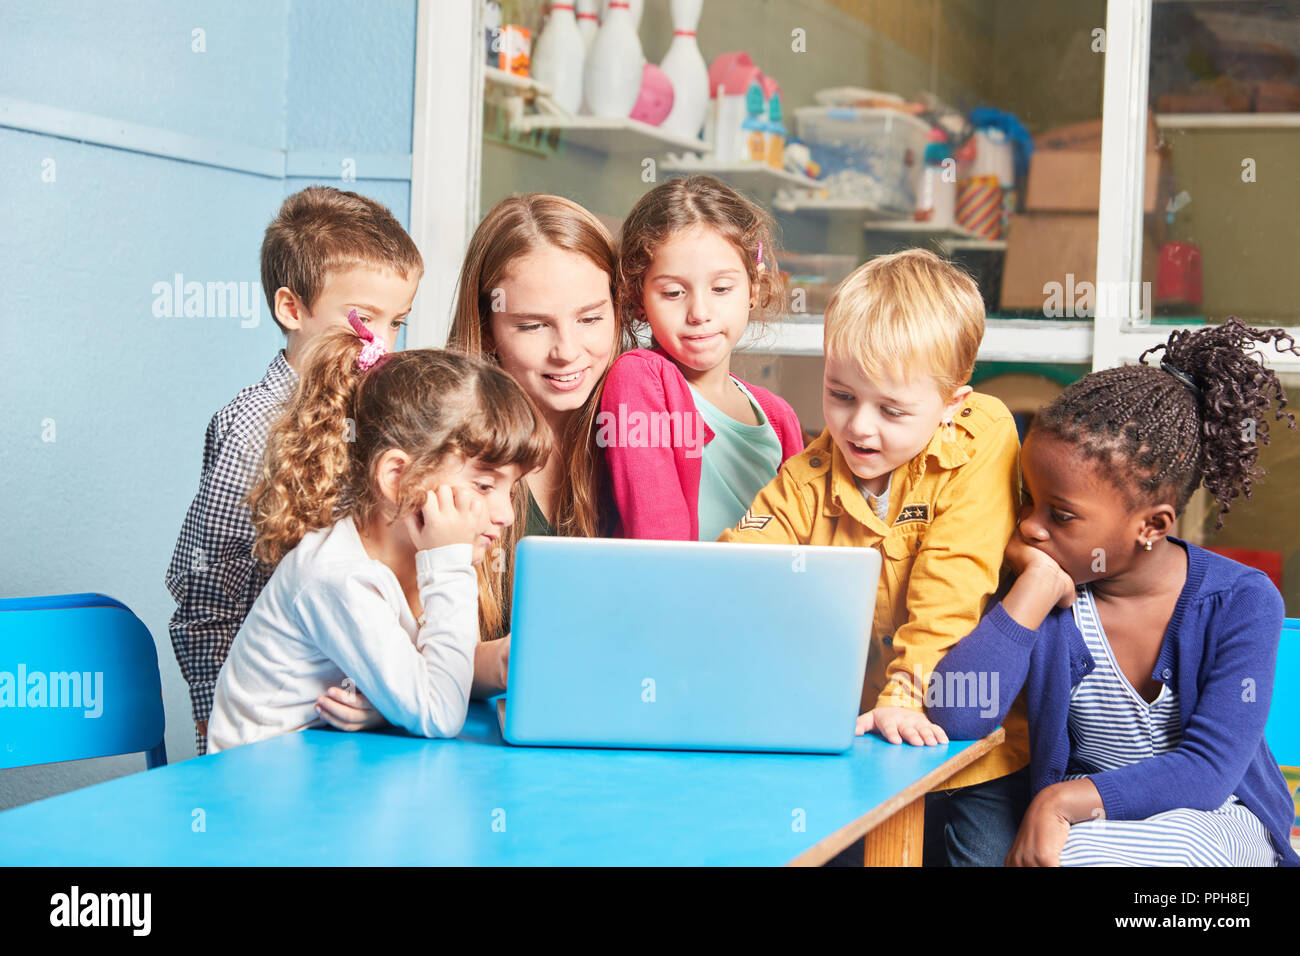 Teacher and group of children learning together at laptop computer in elementary school Stock Photo